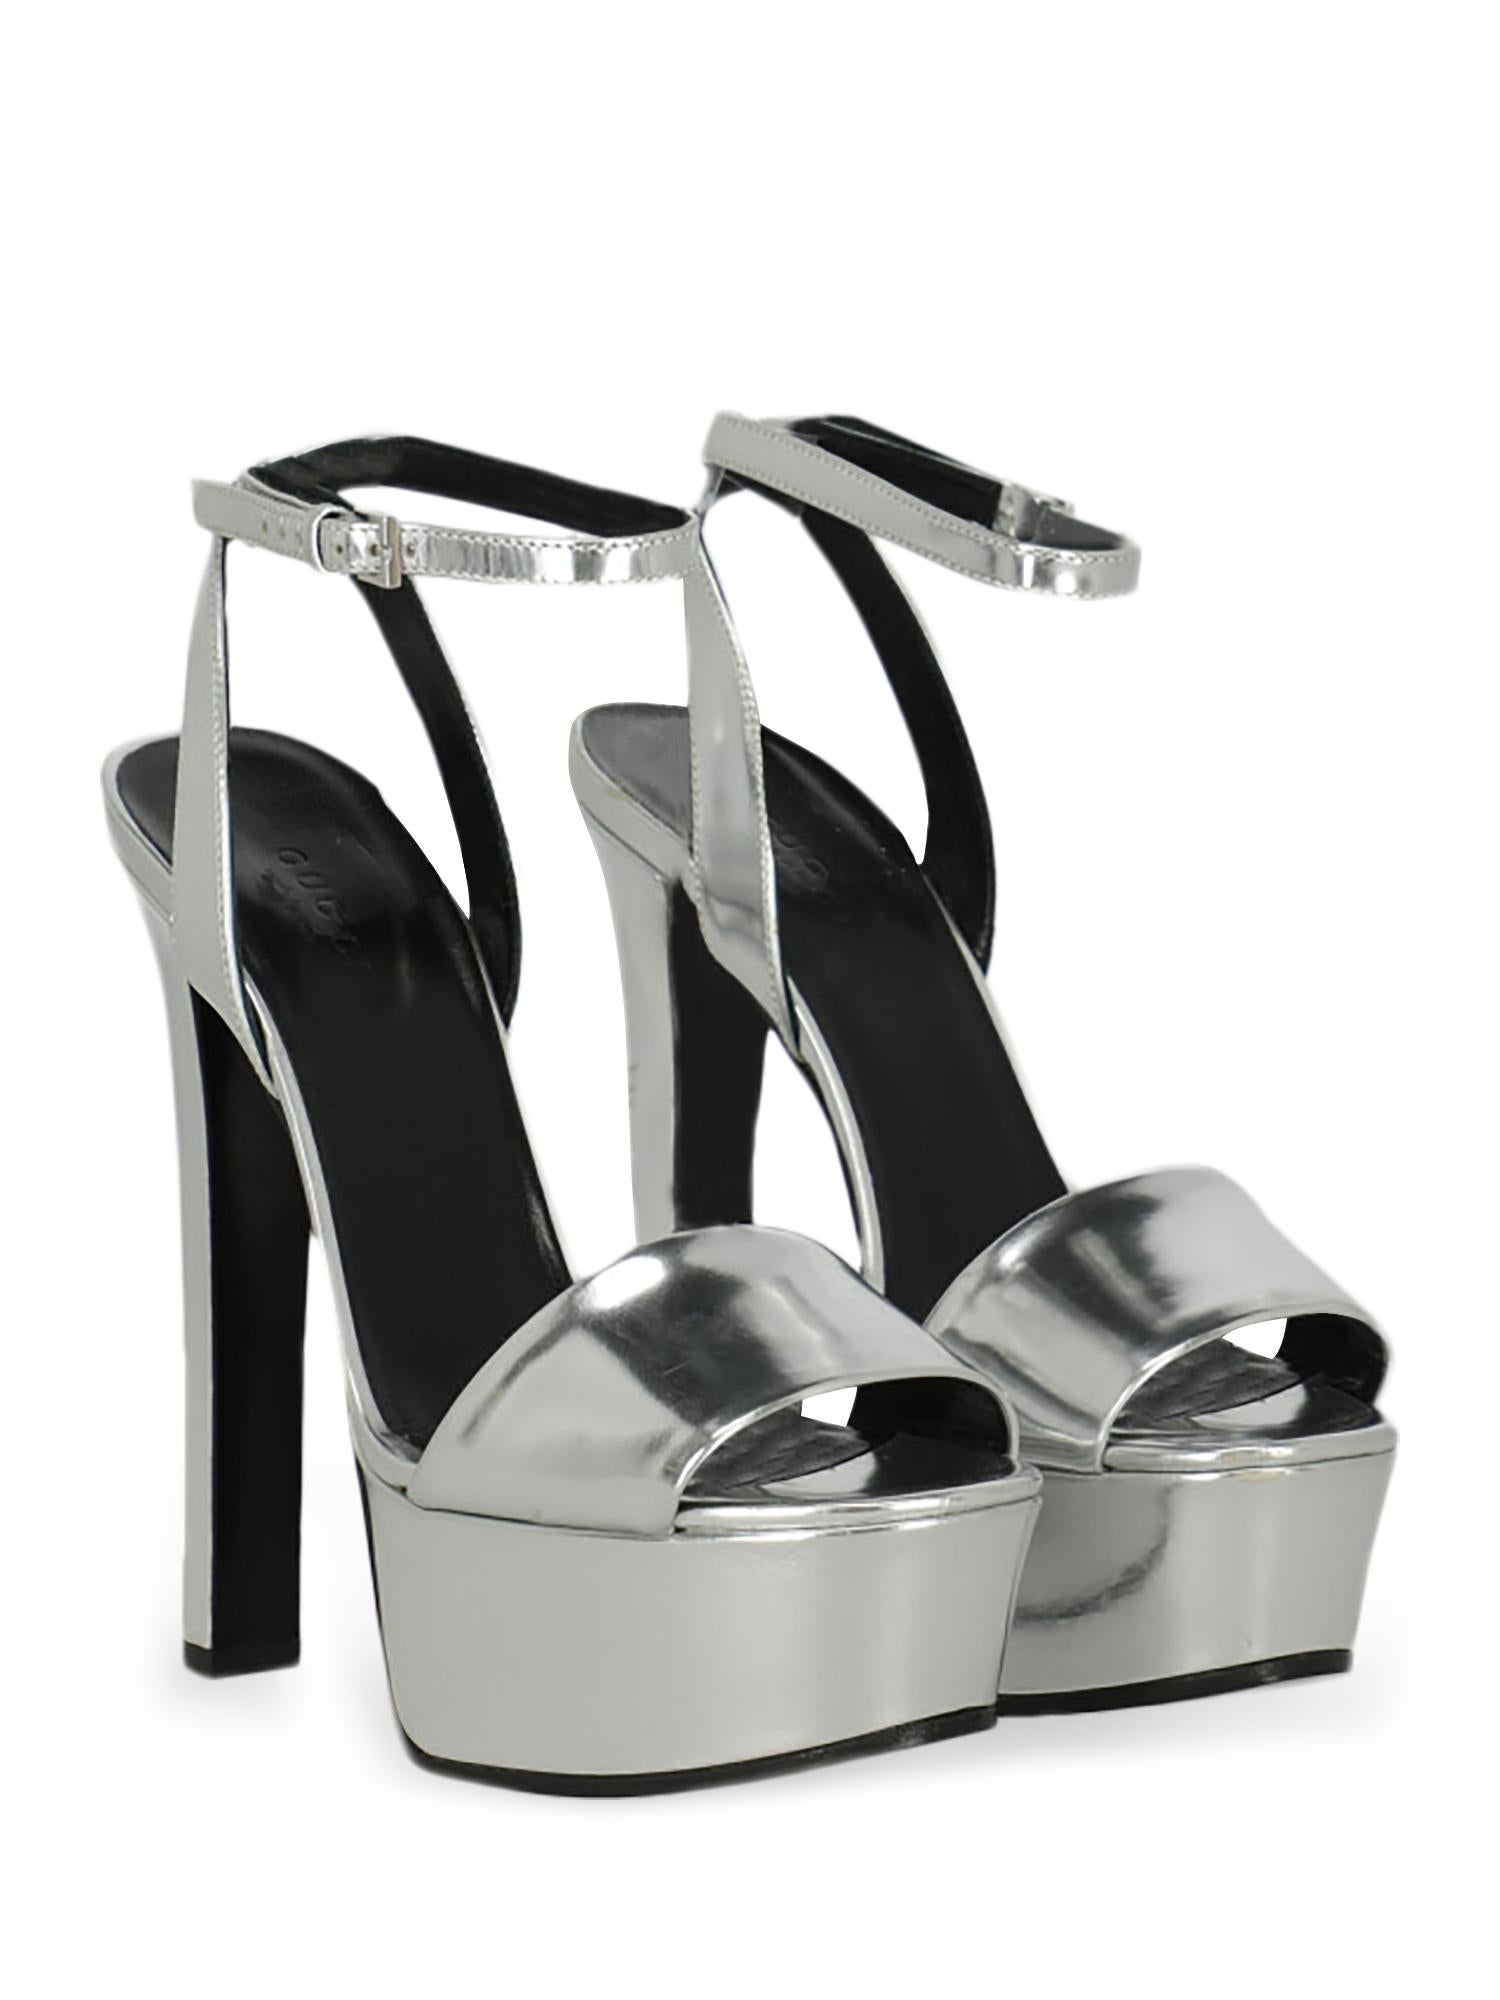 Shoe, leather, solid color, metallic effect, ankle strap, silver-tone hardware, open toe, branded insole, stiletto heel, high heel.

Includes: N/A

Product Condition: Excellent
Heel: visible mark.

Measurements:
Height: 15 cm

Composition:
Upper: